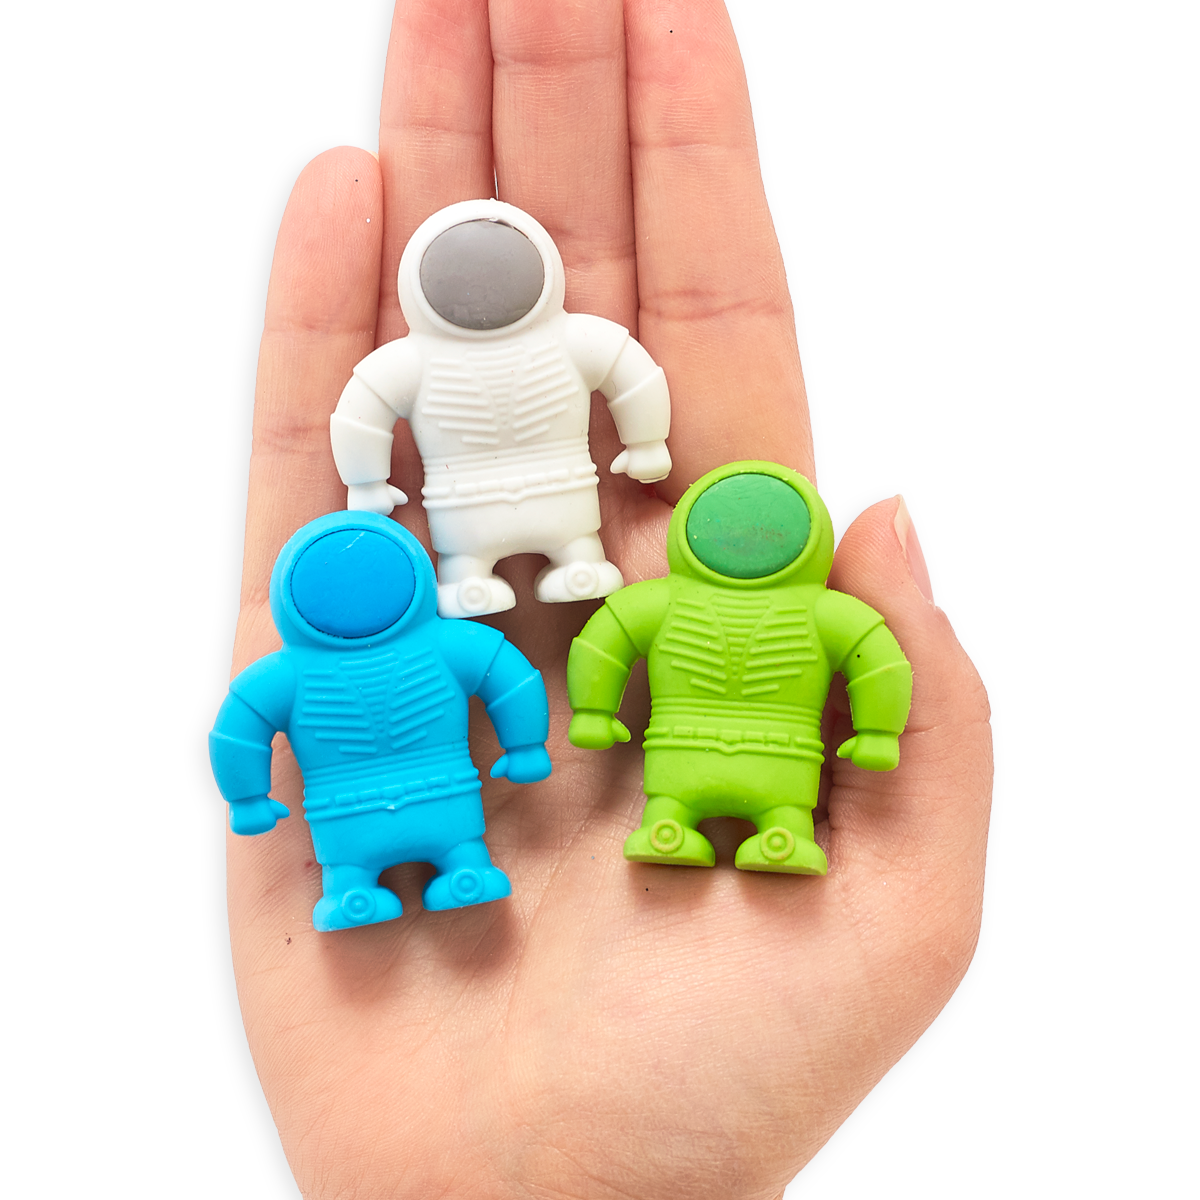 Blue, white and green astronaut erasers in the palm of a hand